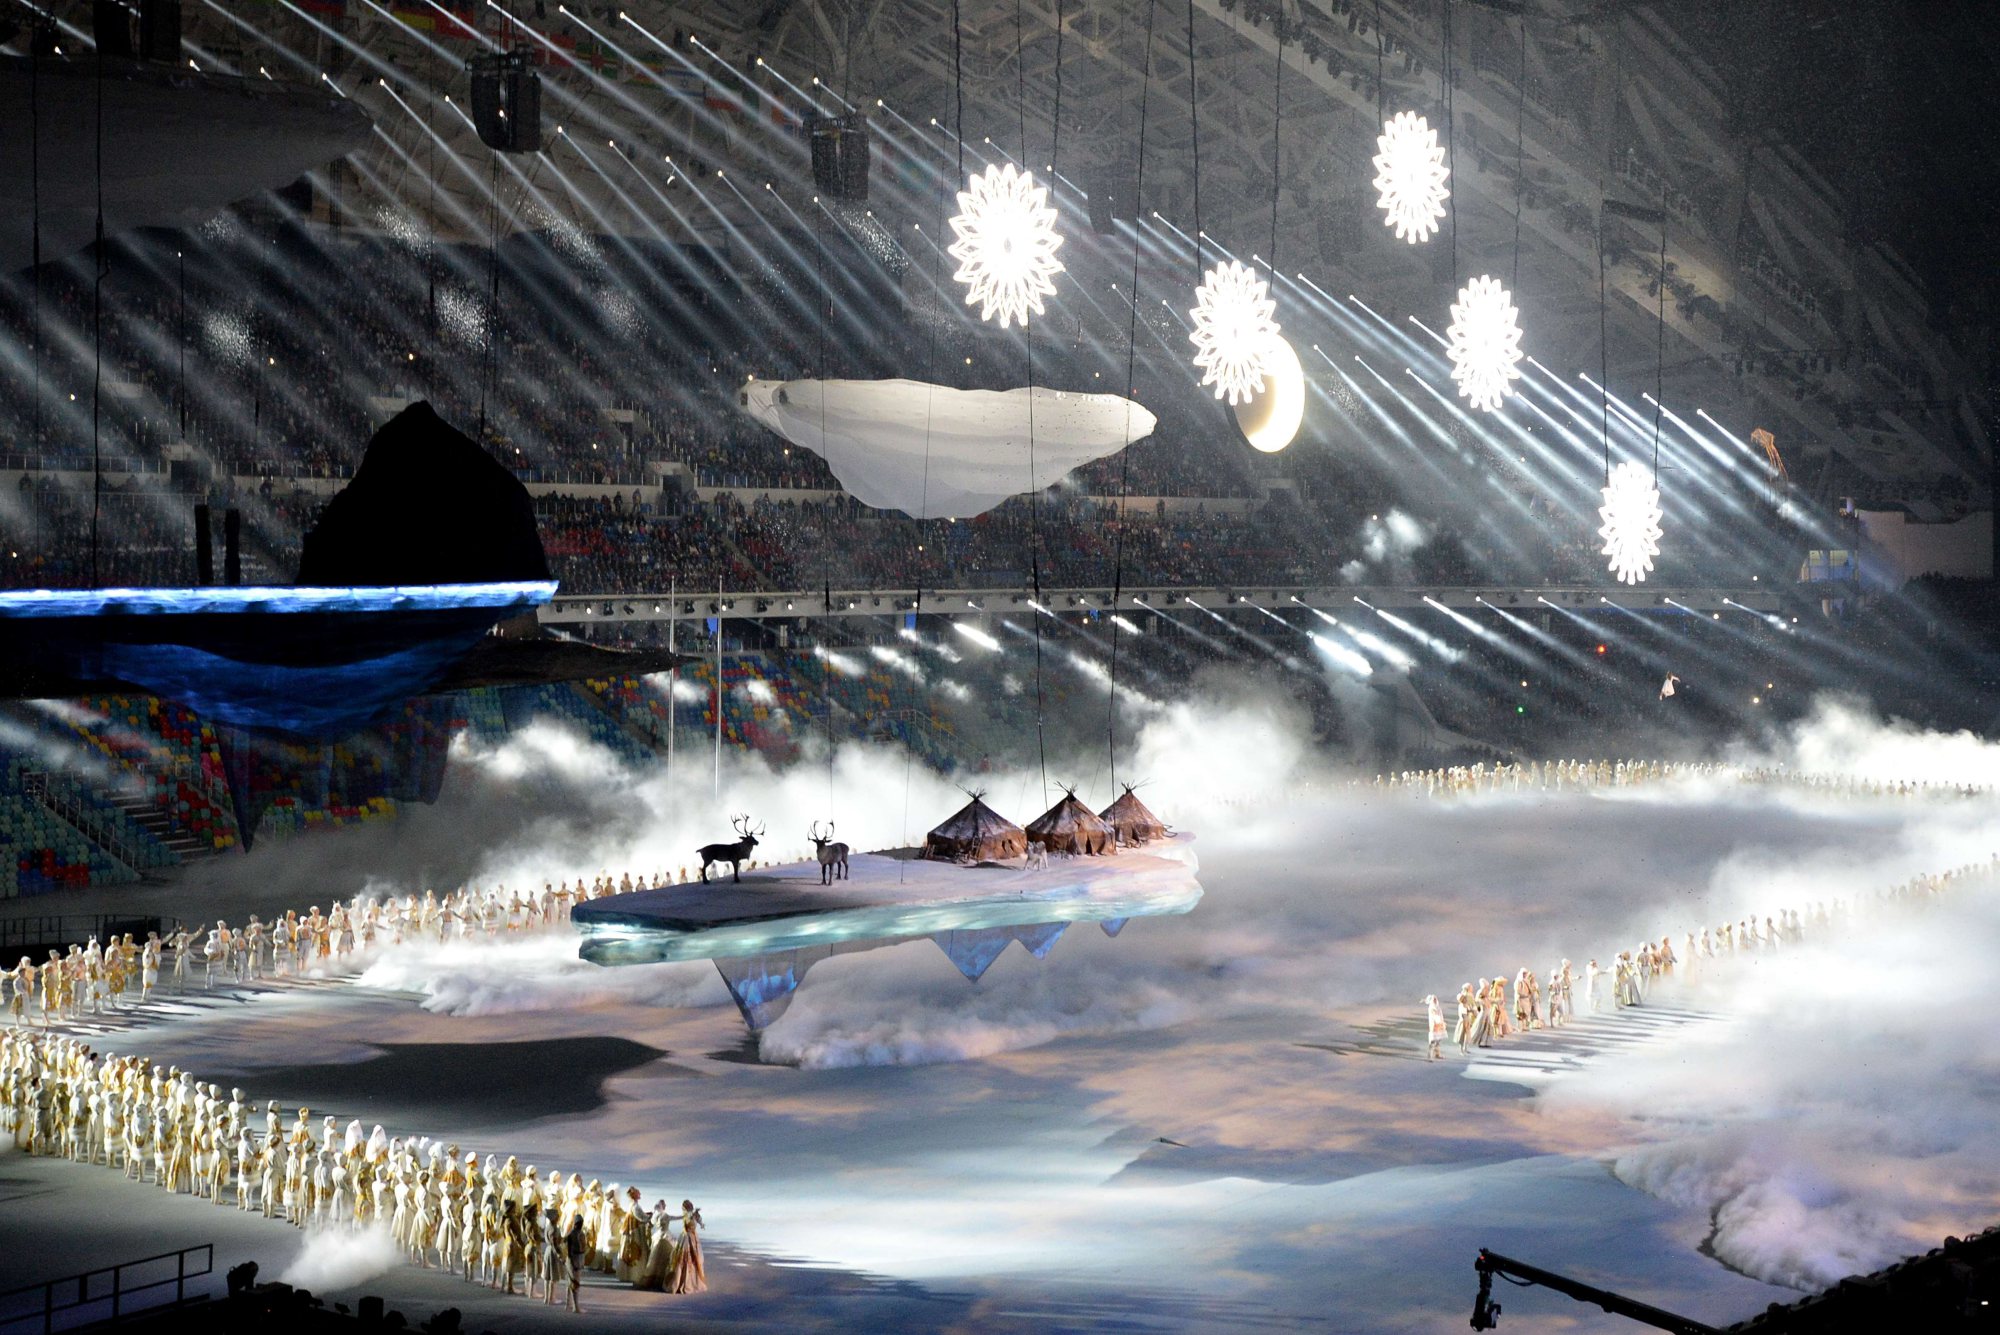 A scene showing the heritage of Russia is portrayed during the Opening Ceremony.